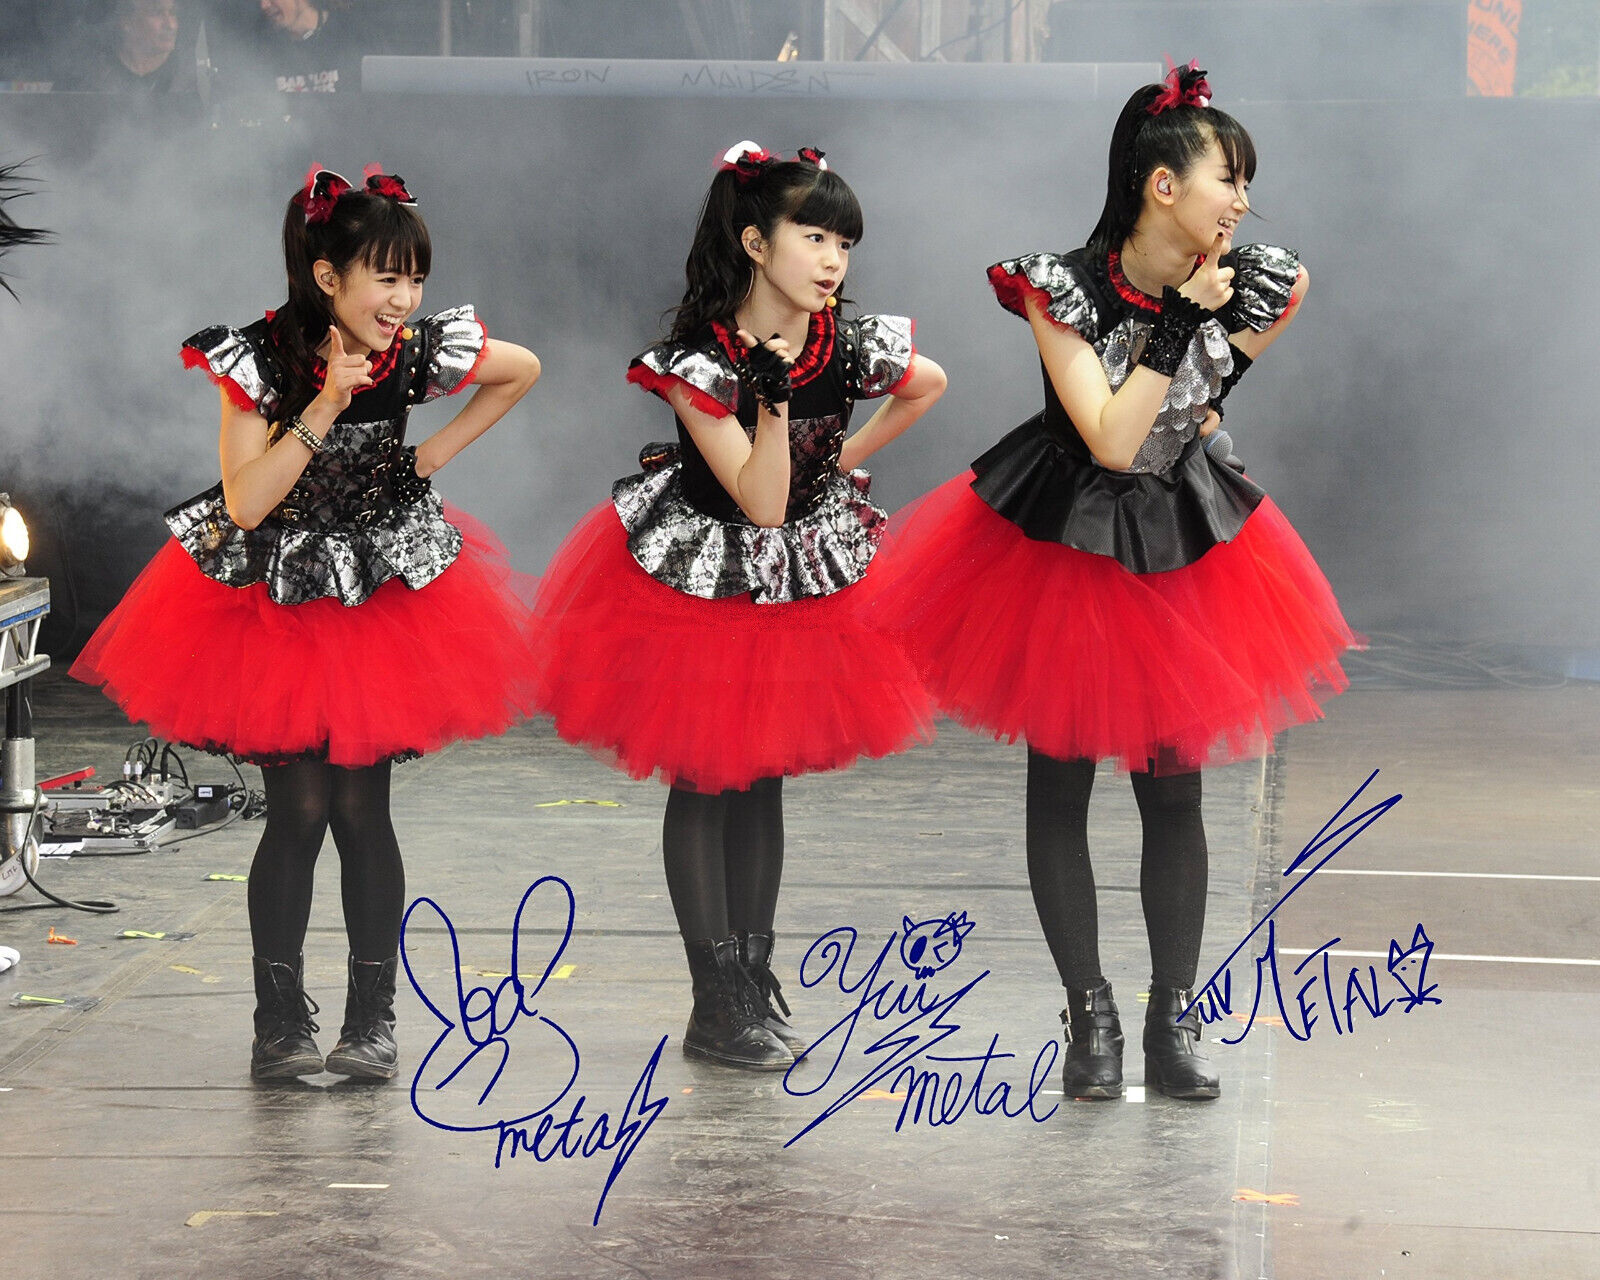 Babymetal Group signed 8.5x11 Signed Photo Reprint